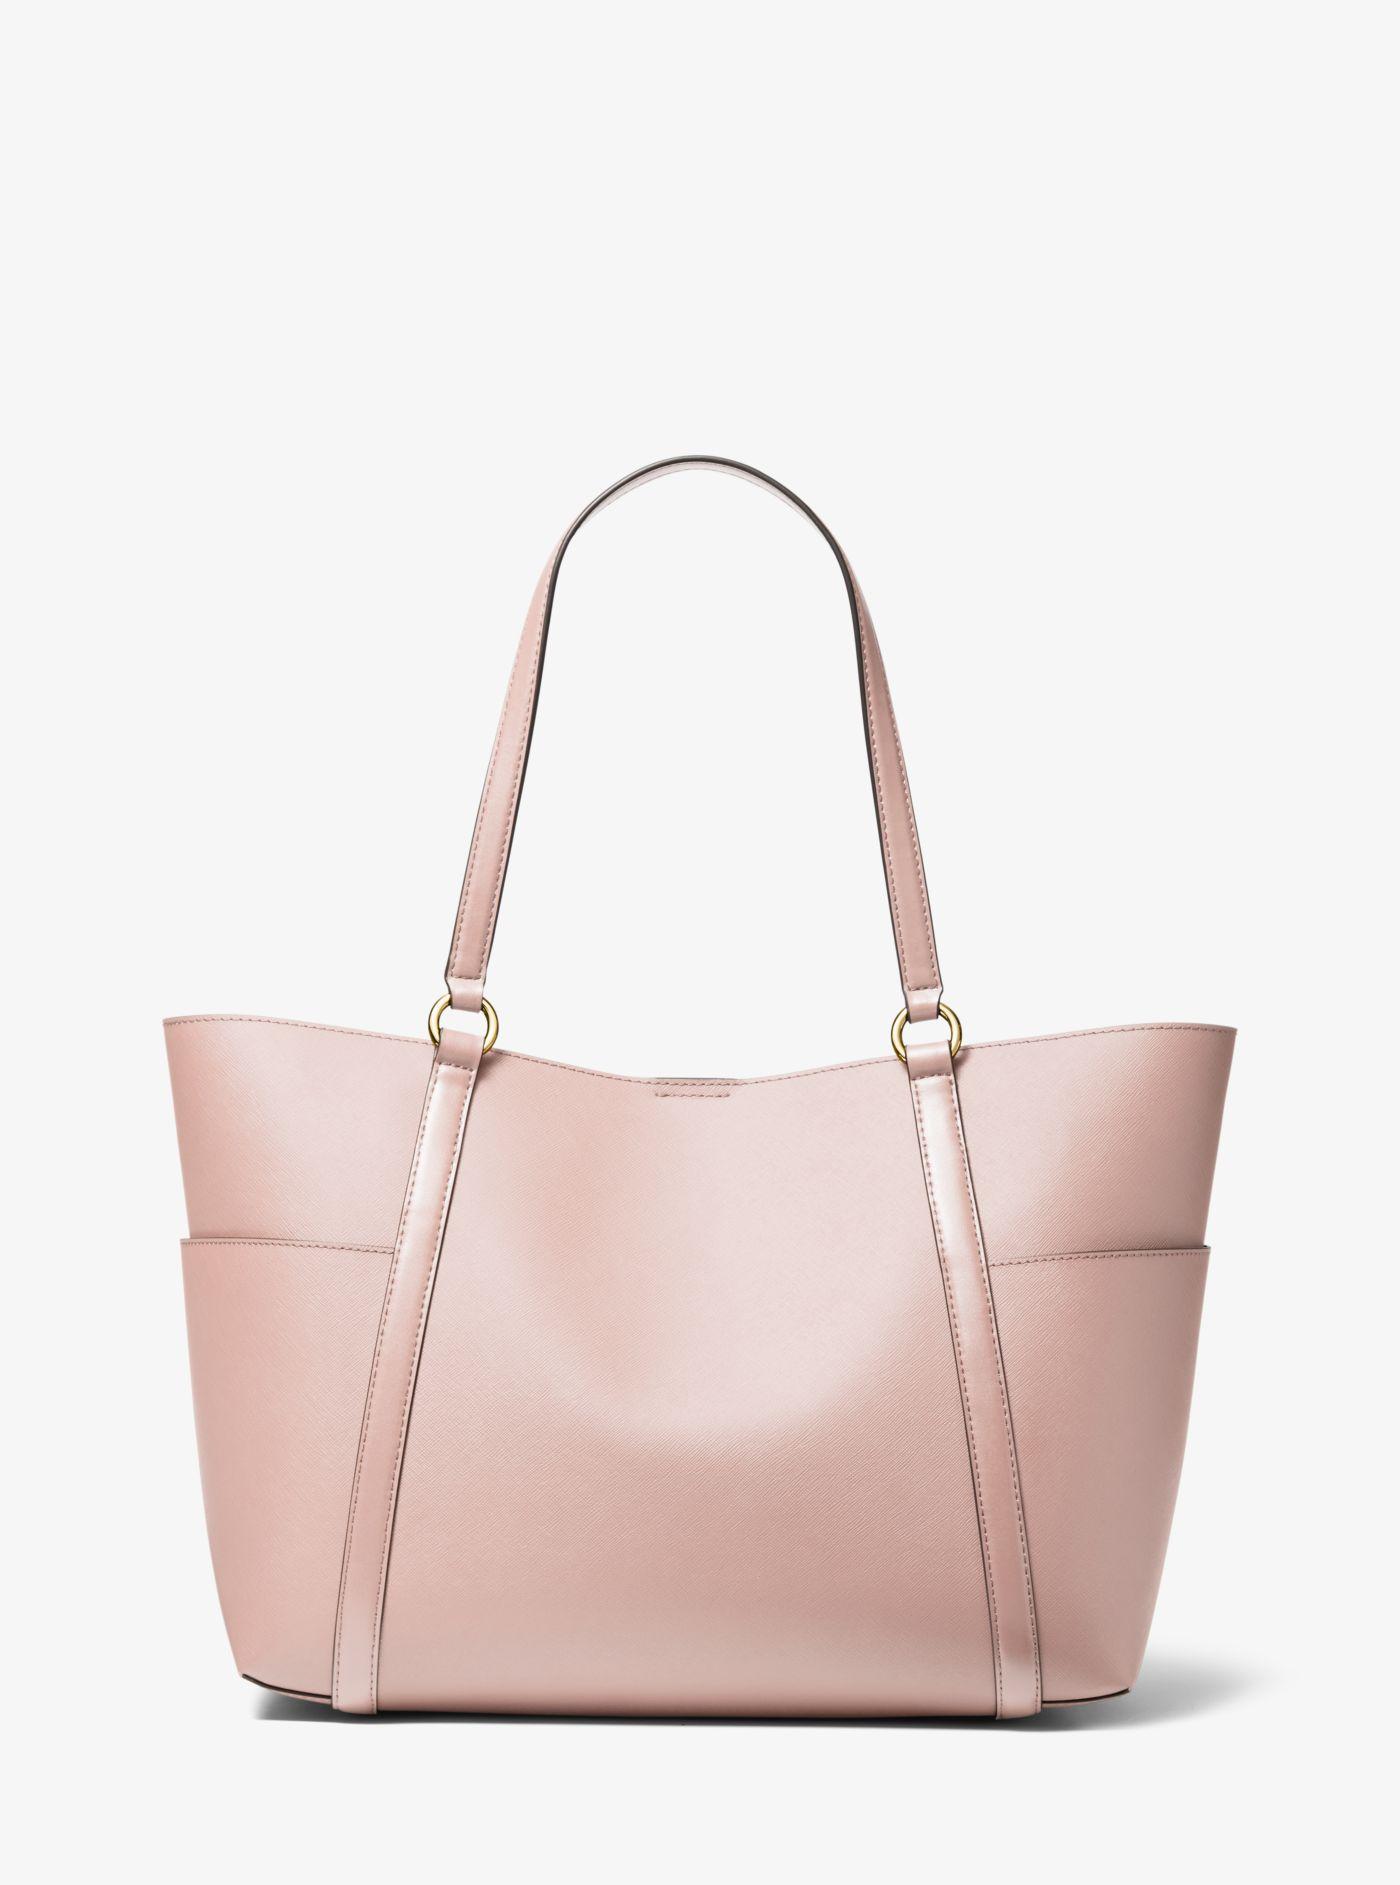 Michael Kors Sullivan Large Saffiano Leather Top-zip Tote Bag in Pink | Lyst